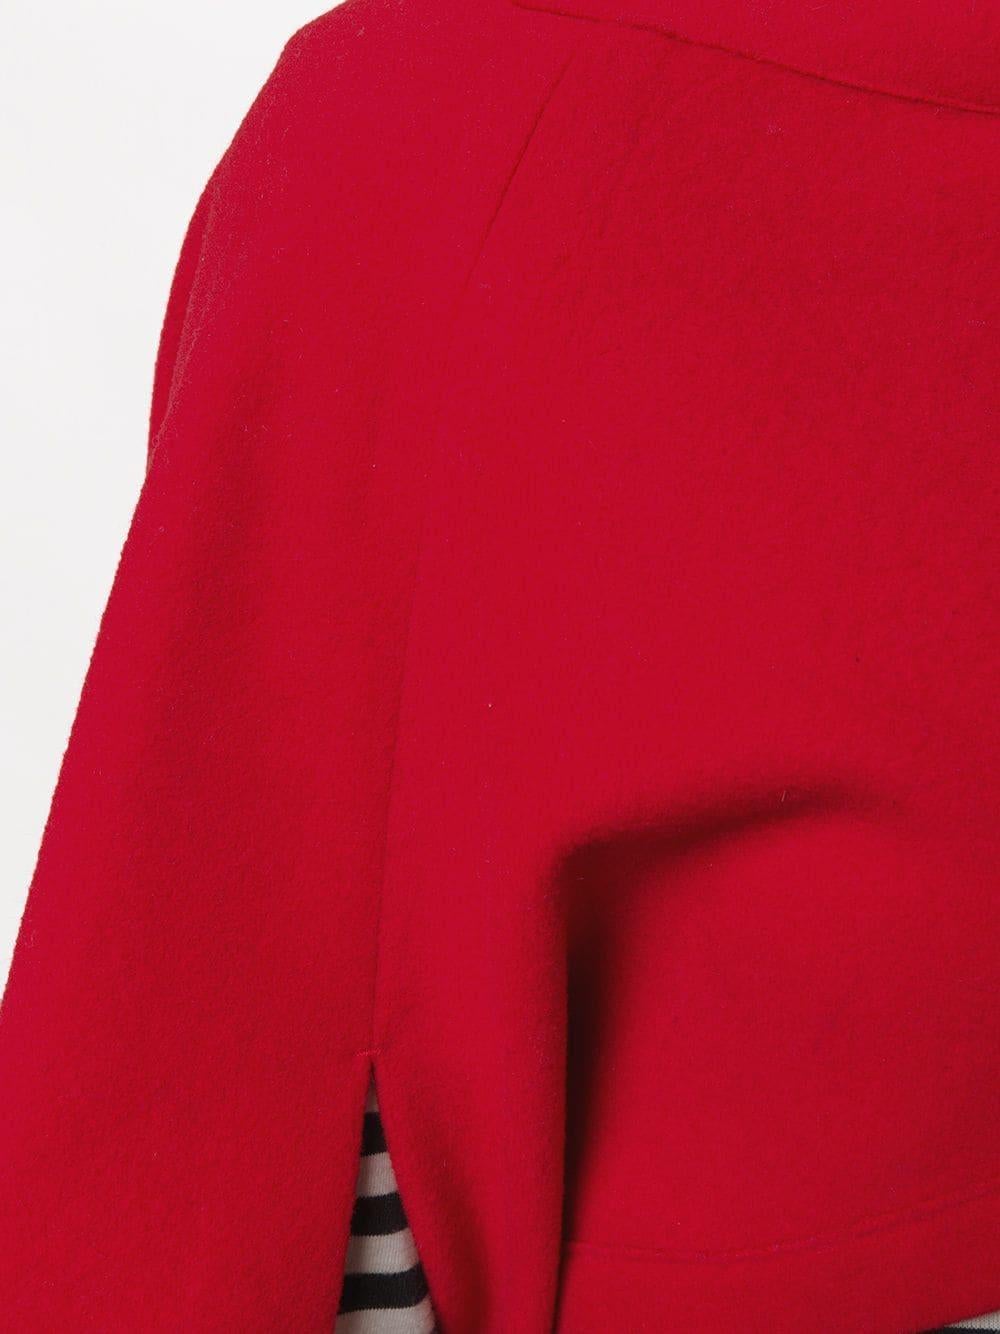 Expertly crafted from a vibrant poppy red cashmere-blend, this pre-owned, cropped jumper by Yohji Yamamoto flatteringly elevates the traditional knit with an asymmetric style, a wide boat-neck design and a pointed tip for an effortlessly chic yet